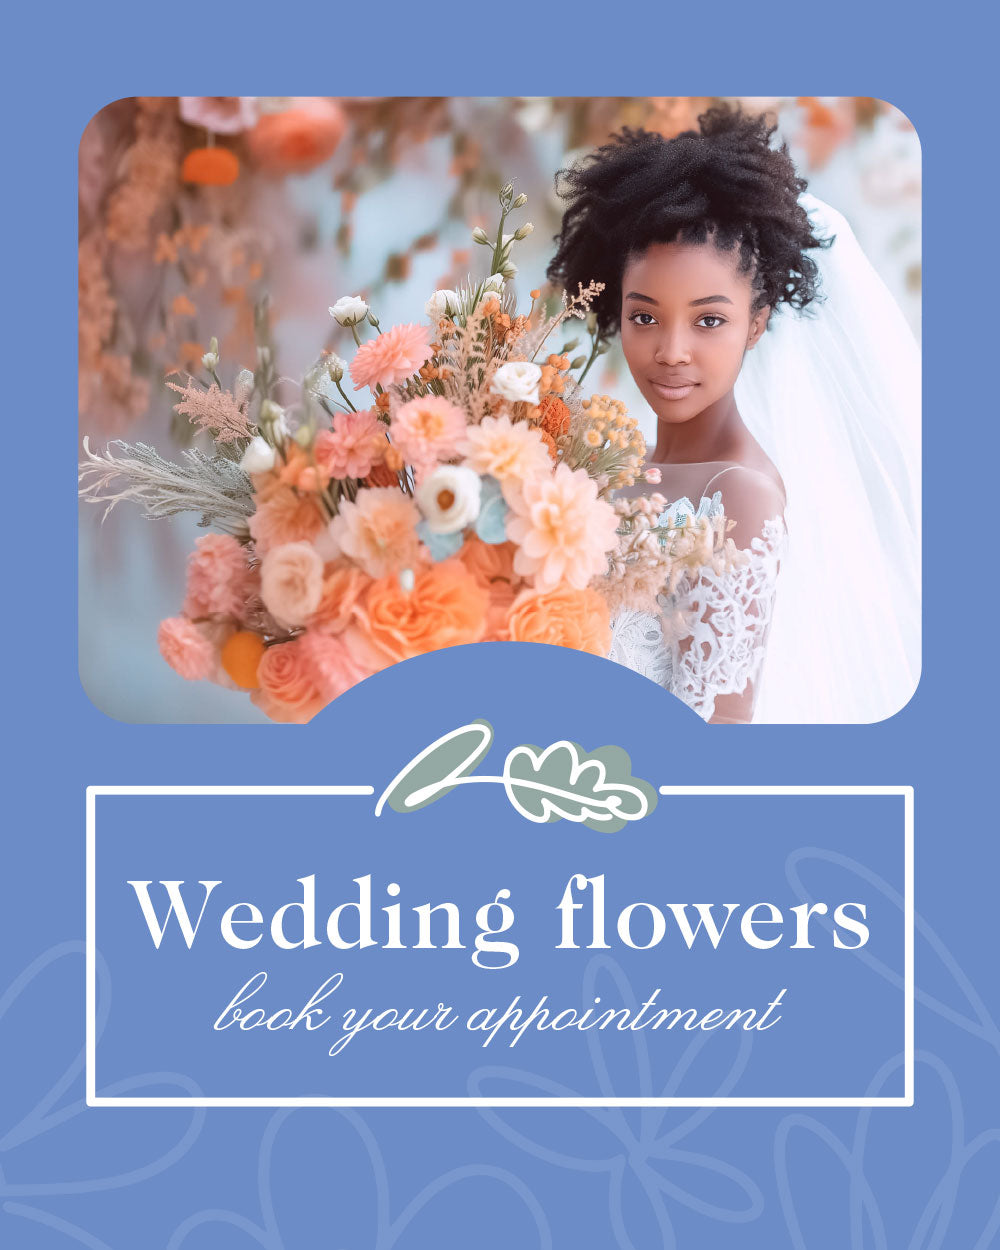 A beautiful bride holding a large bouquet of pastel-coloured flowers with the text 'Wedding flowers, book your appointment' overlayed. Weddings at Fabulous Flowers and Gifts.